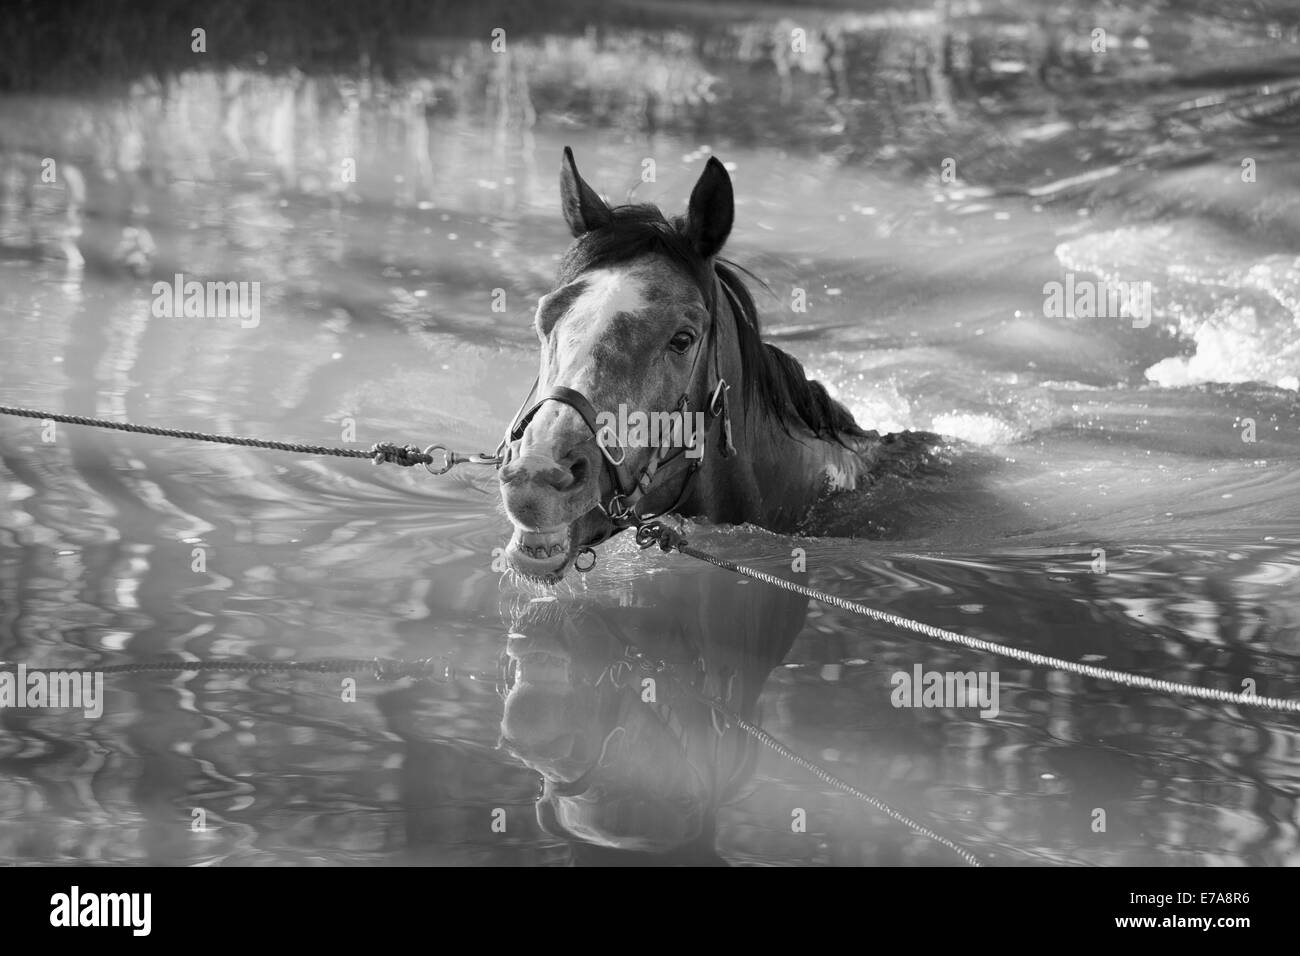 Horse tied with ropes in water Stock Photo